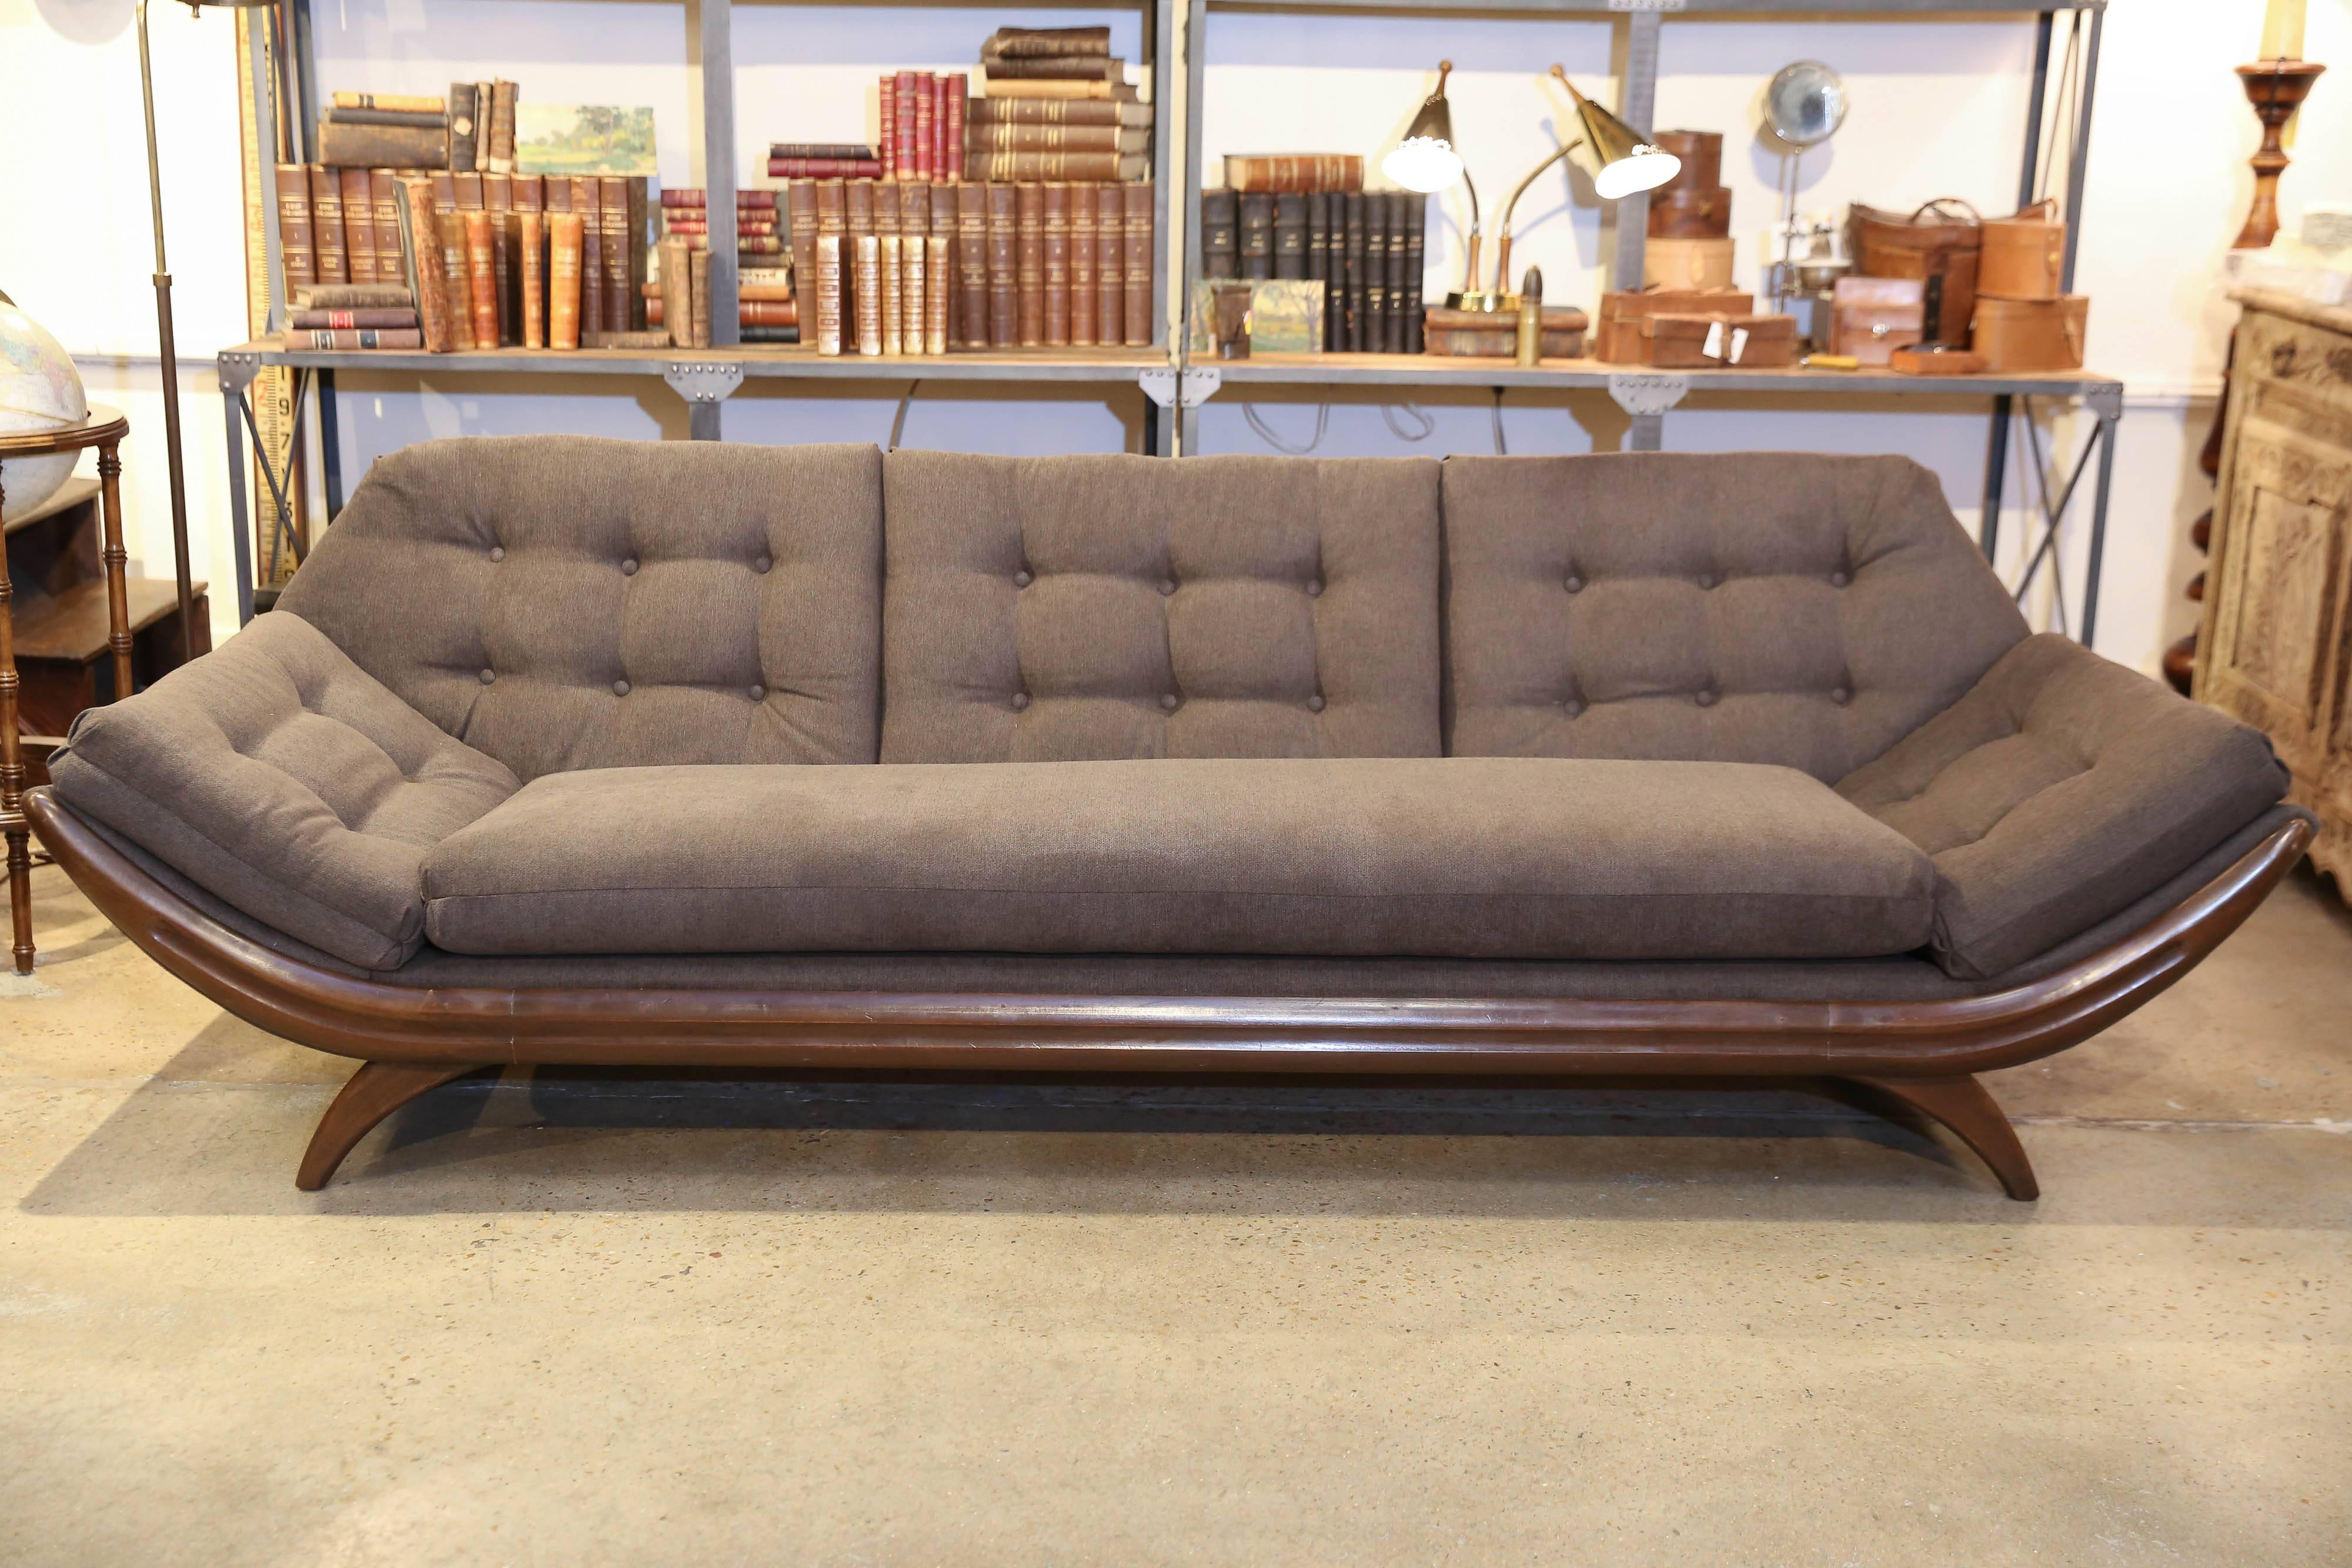 Reconstructed and Reupholstered Mid-Century Modern Adrian Pearsall style wide gondola sofa constructed with wood base and wooden legs. Reupholstered in a charcoal grey fabric, removable seat and back cushions for comfort. 

Matching chair listed.